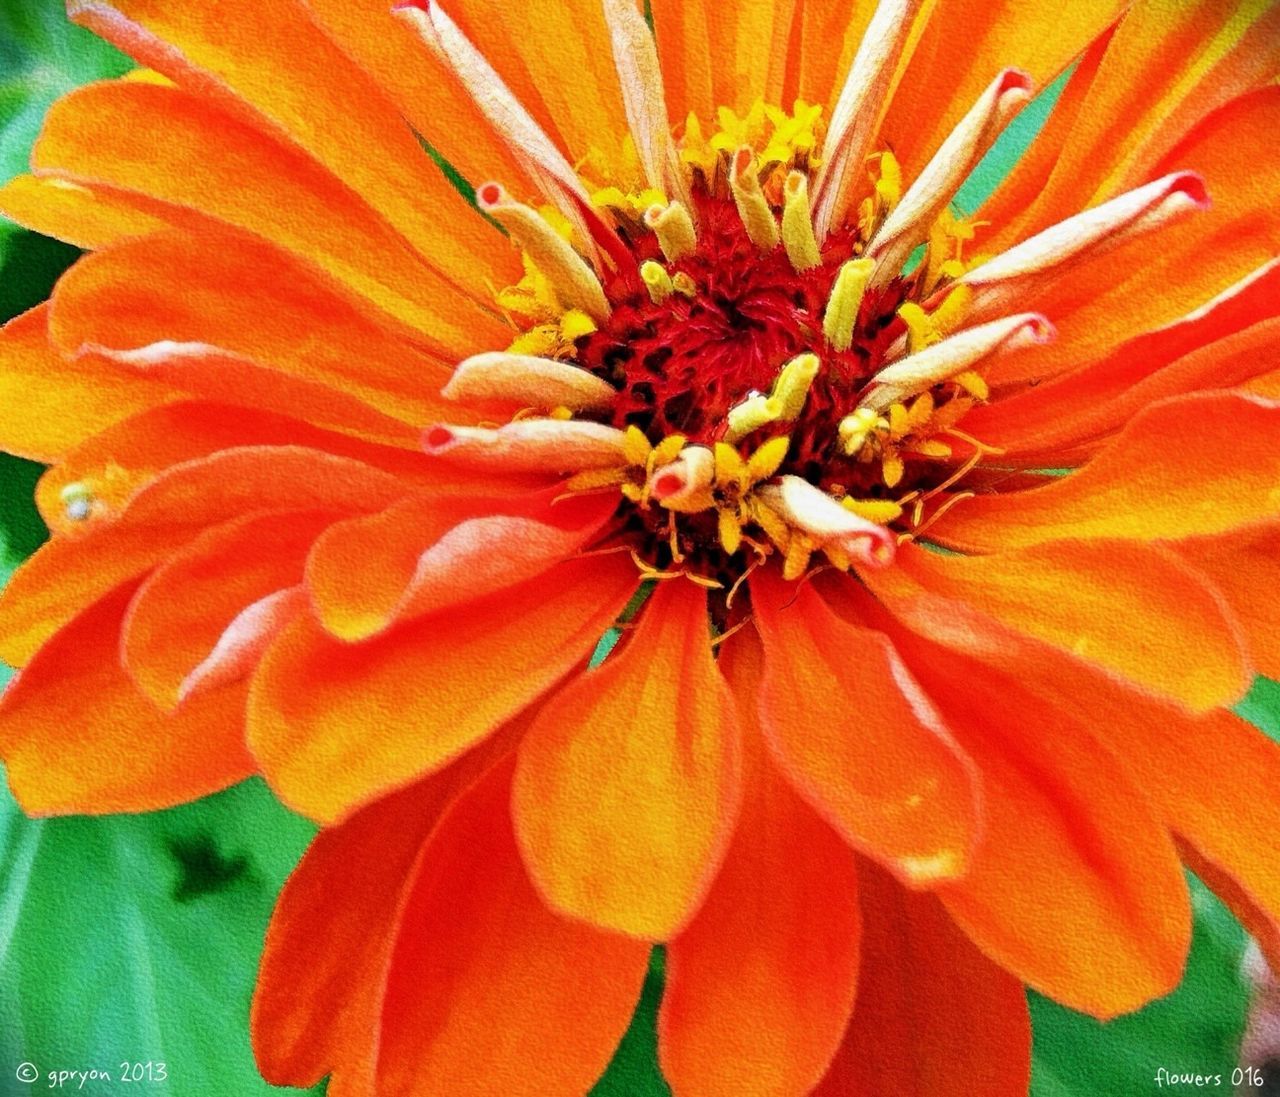 flower, petal, freshness, flower head, fragility, beauty in nature, growth, close-up, pollen, orange color, nature, blooming, red, plant, stamen, single flower, full frame, in bloom, high angle view, focus on foreground